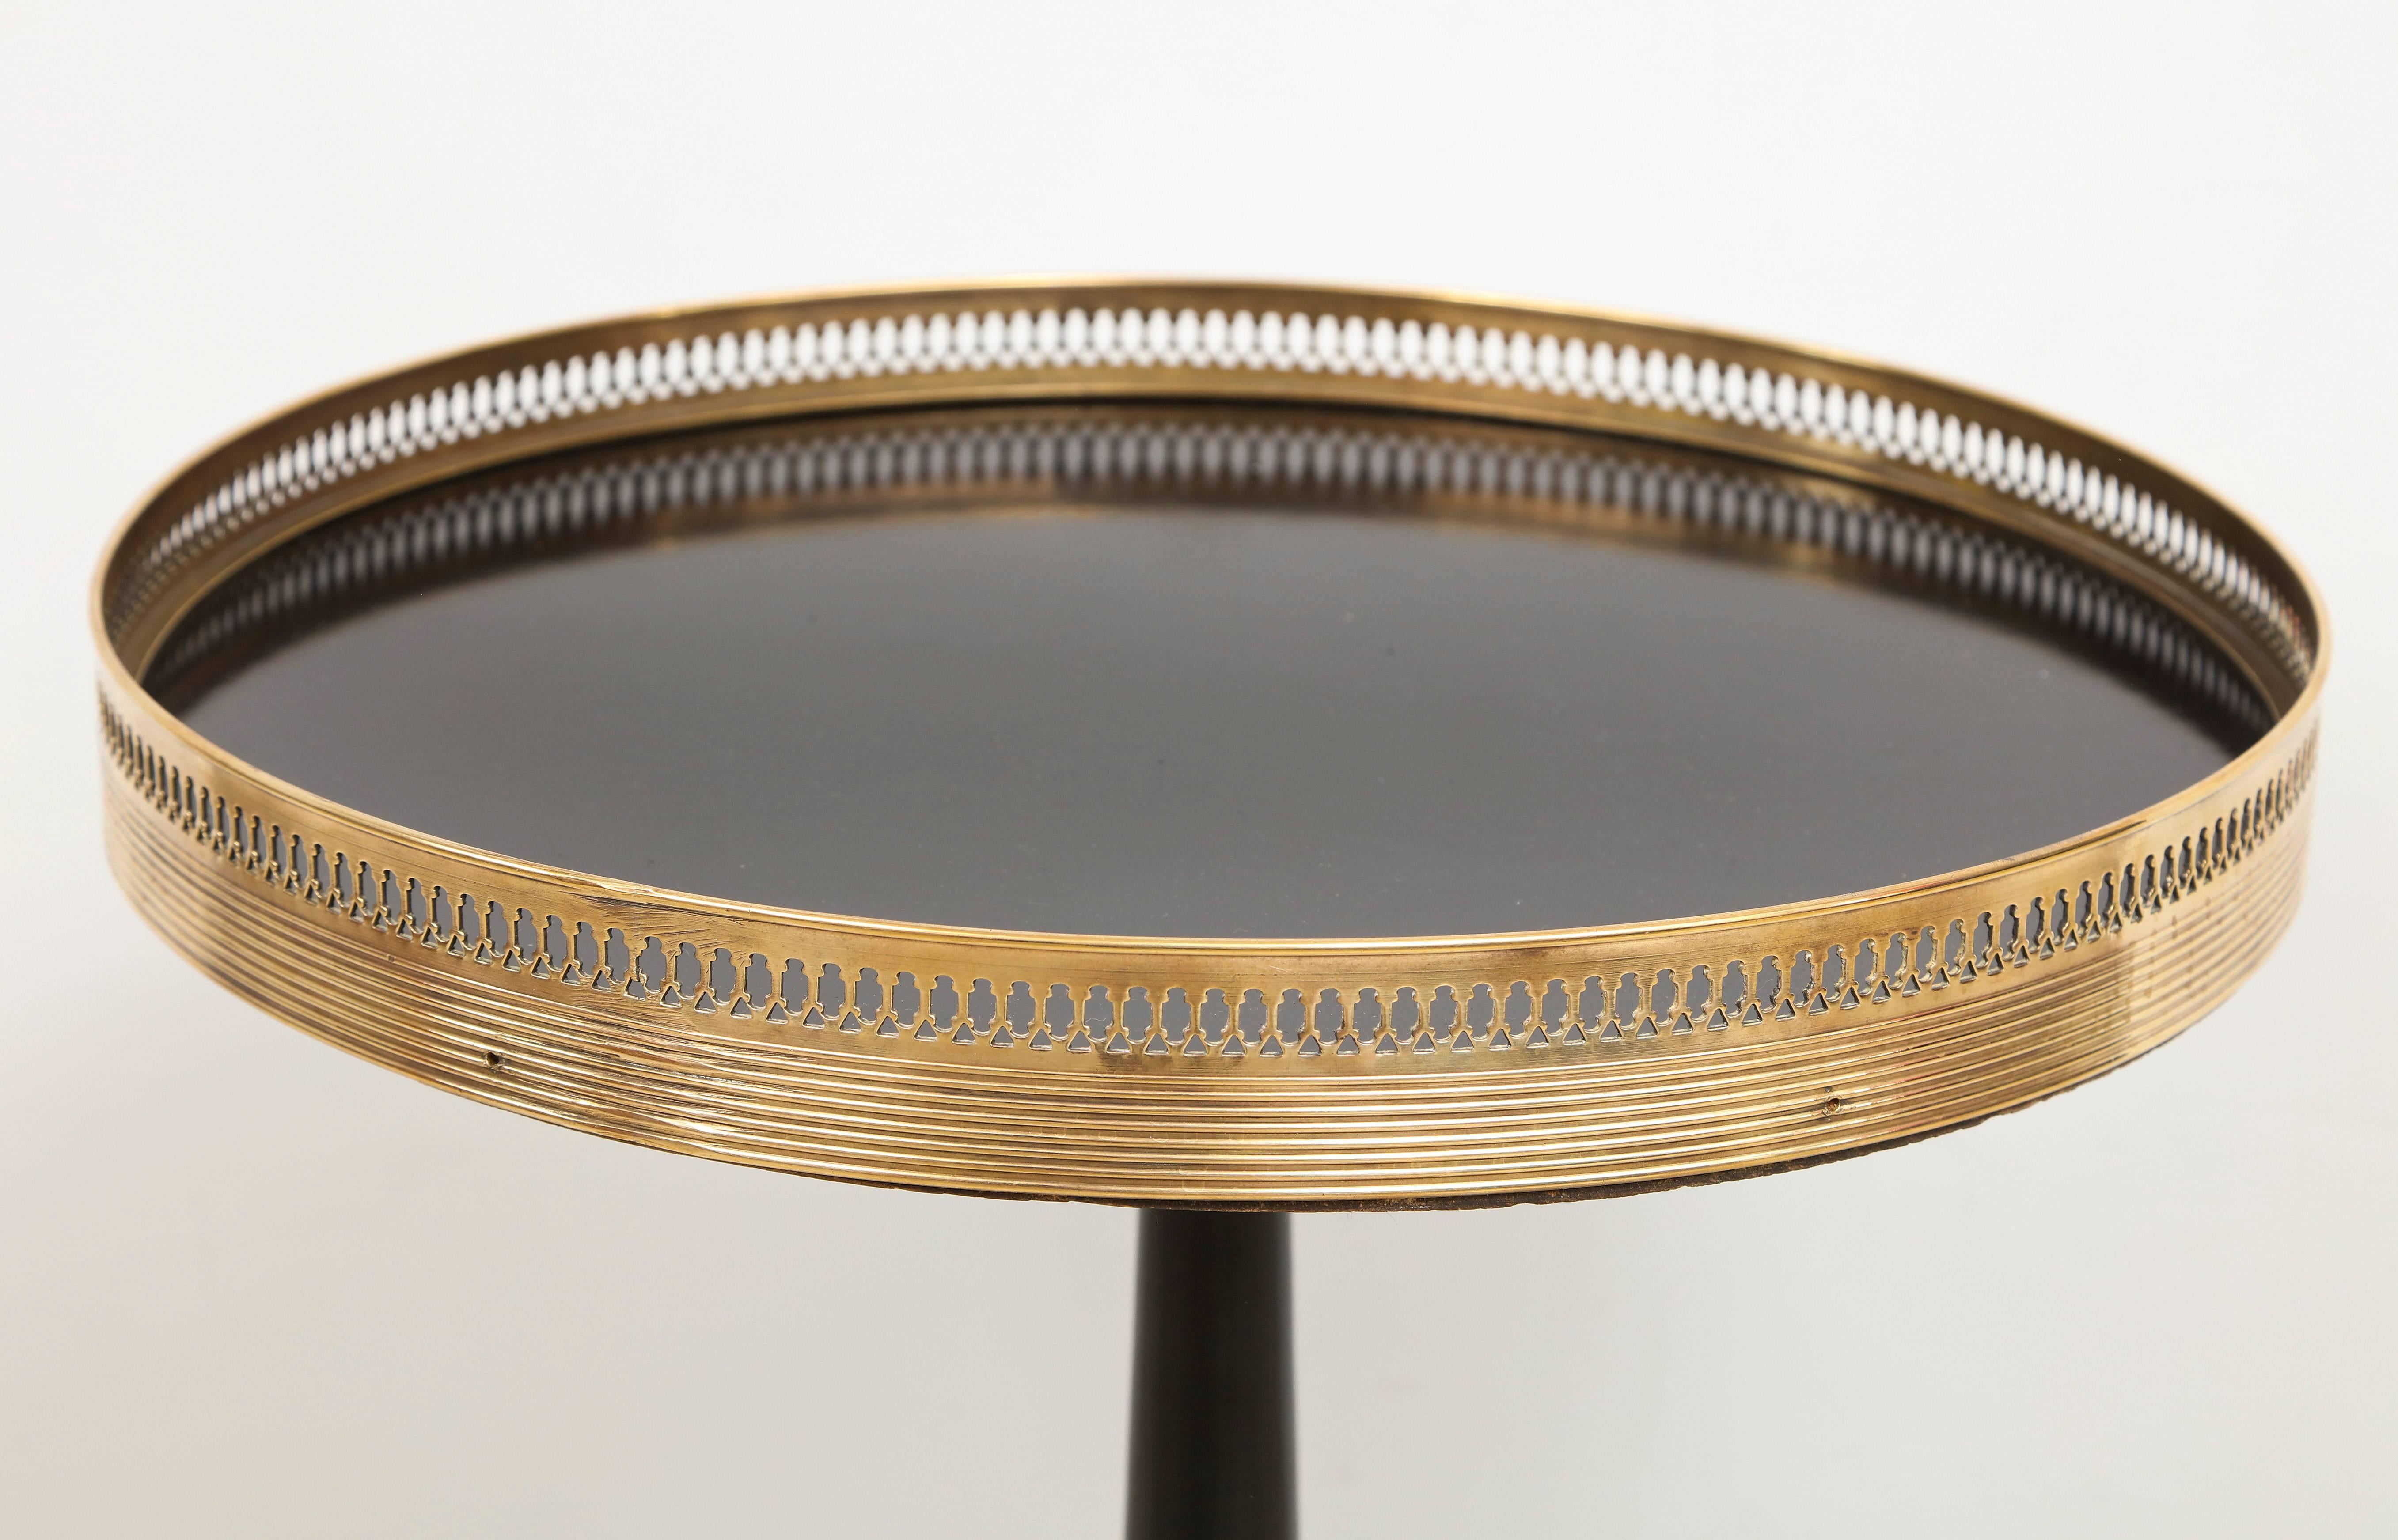 Regency Style End Table with Brass Gallery on Brass Sabots 1